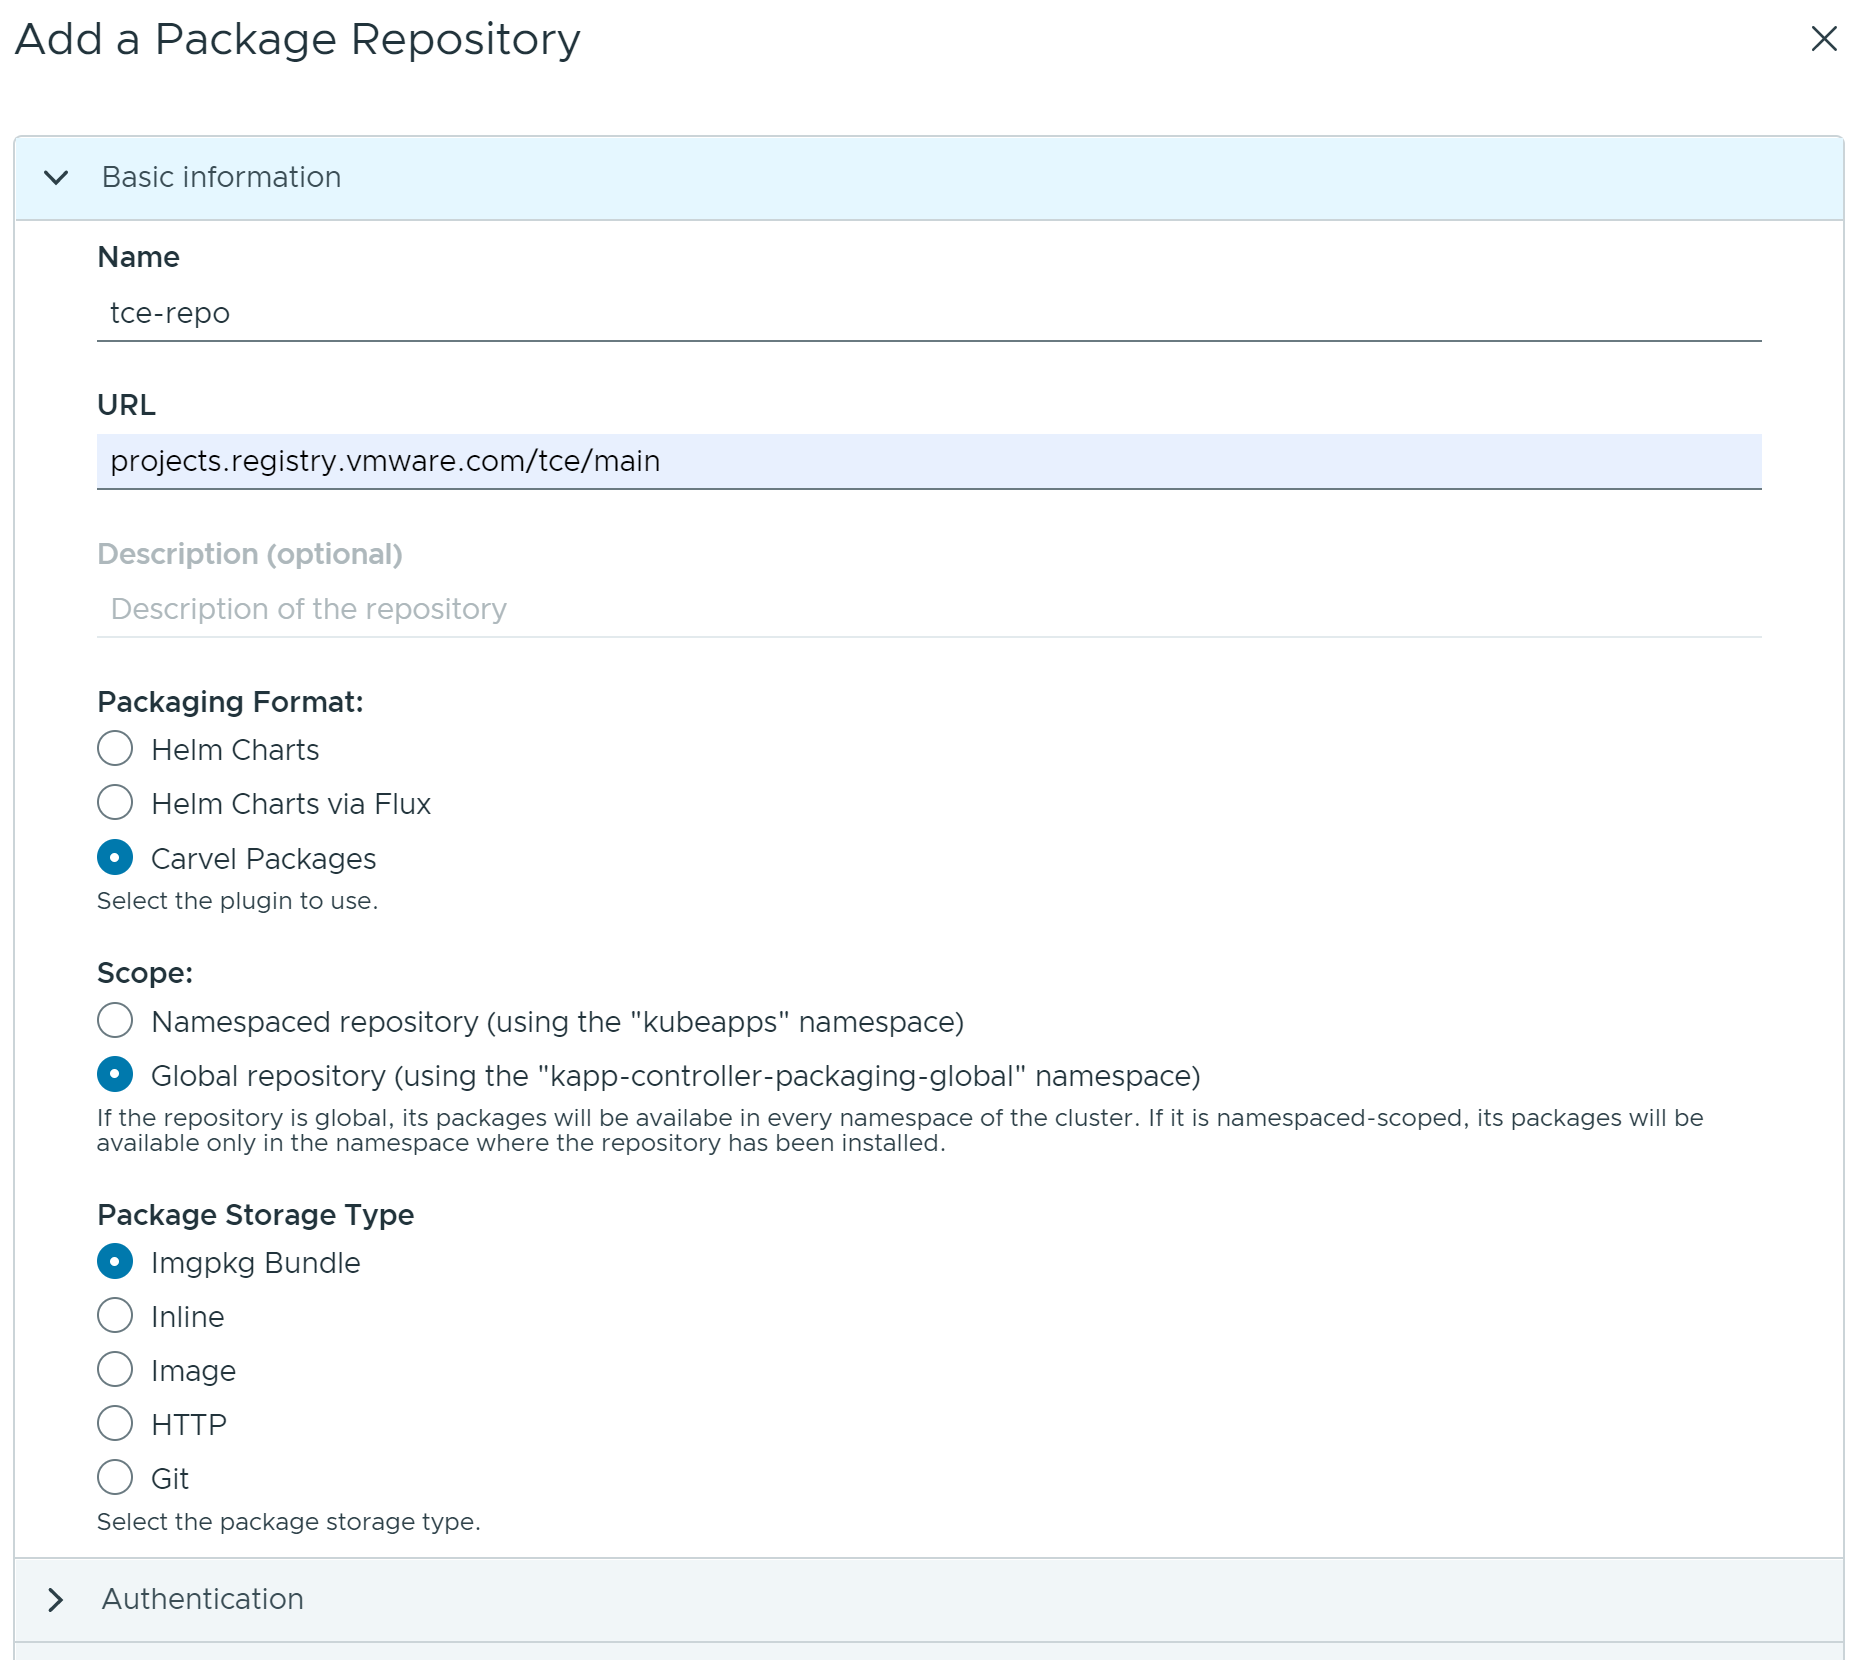 Add Package repository pop-up